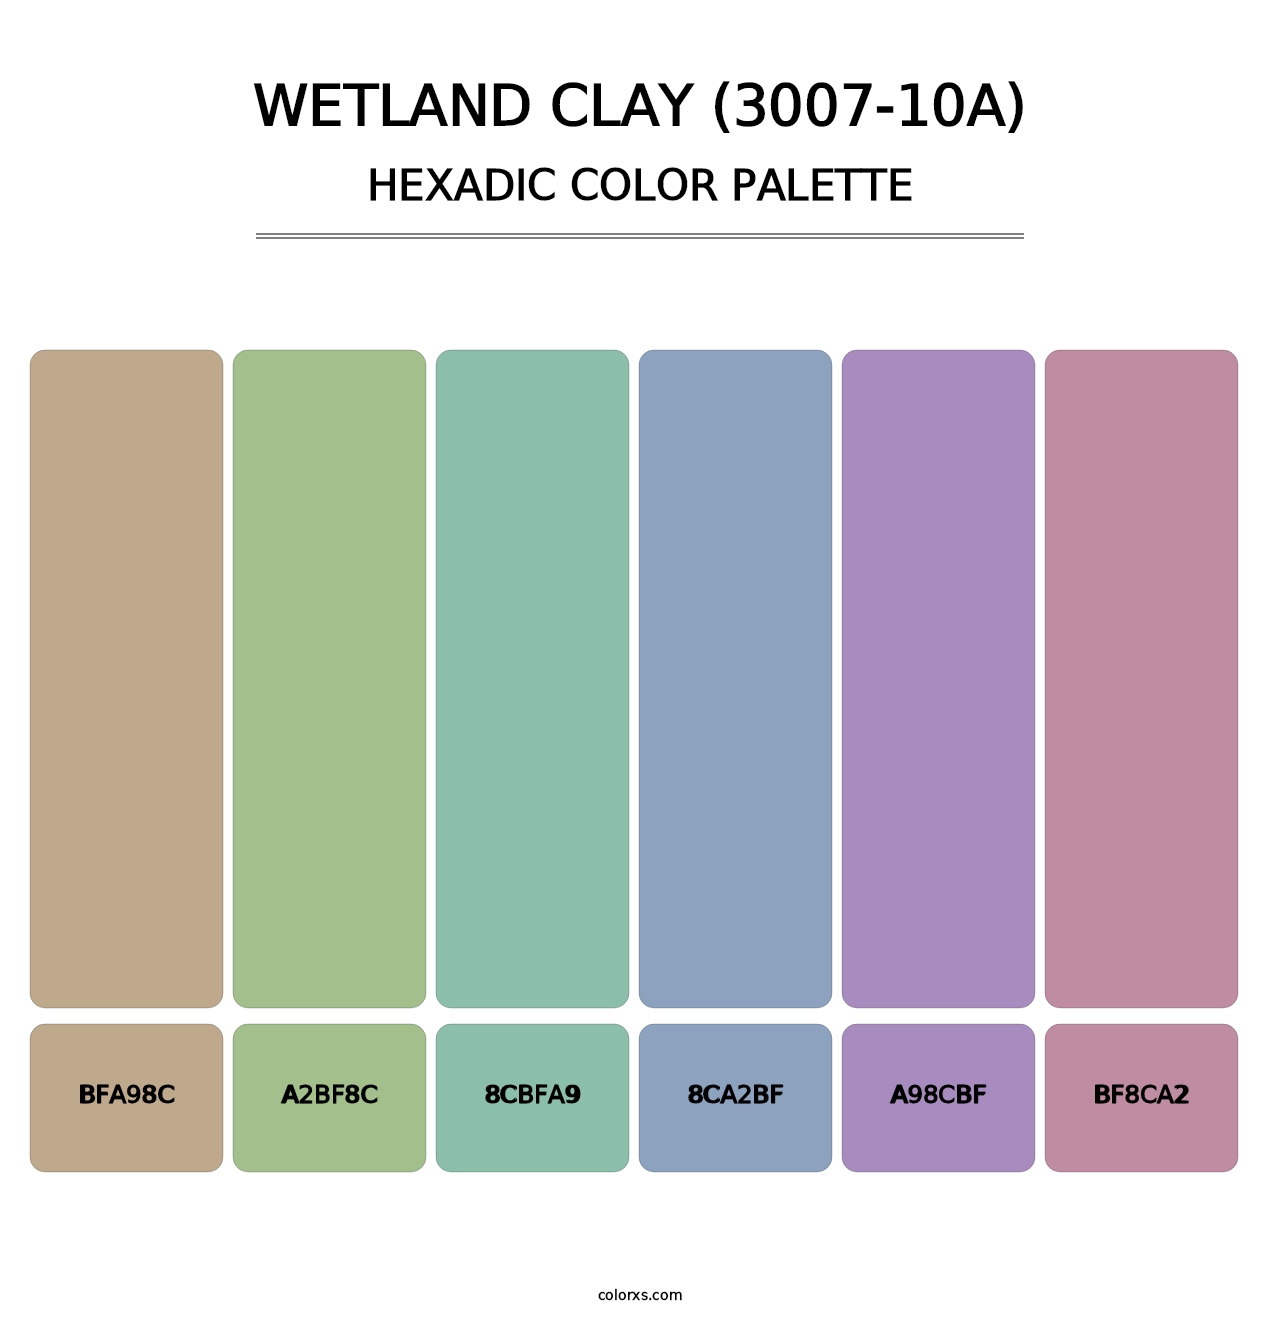 Wetland Clay (3007-10A) - Hexadic Color Palette